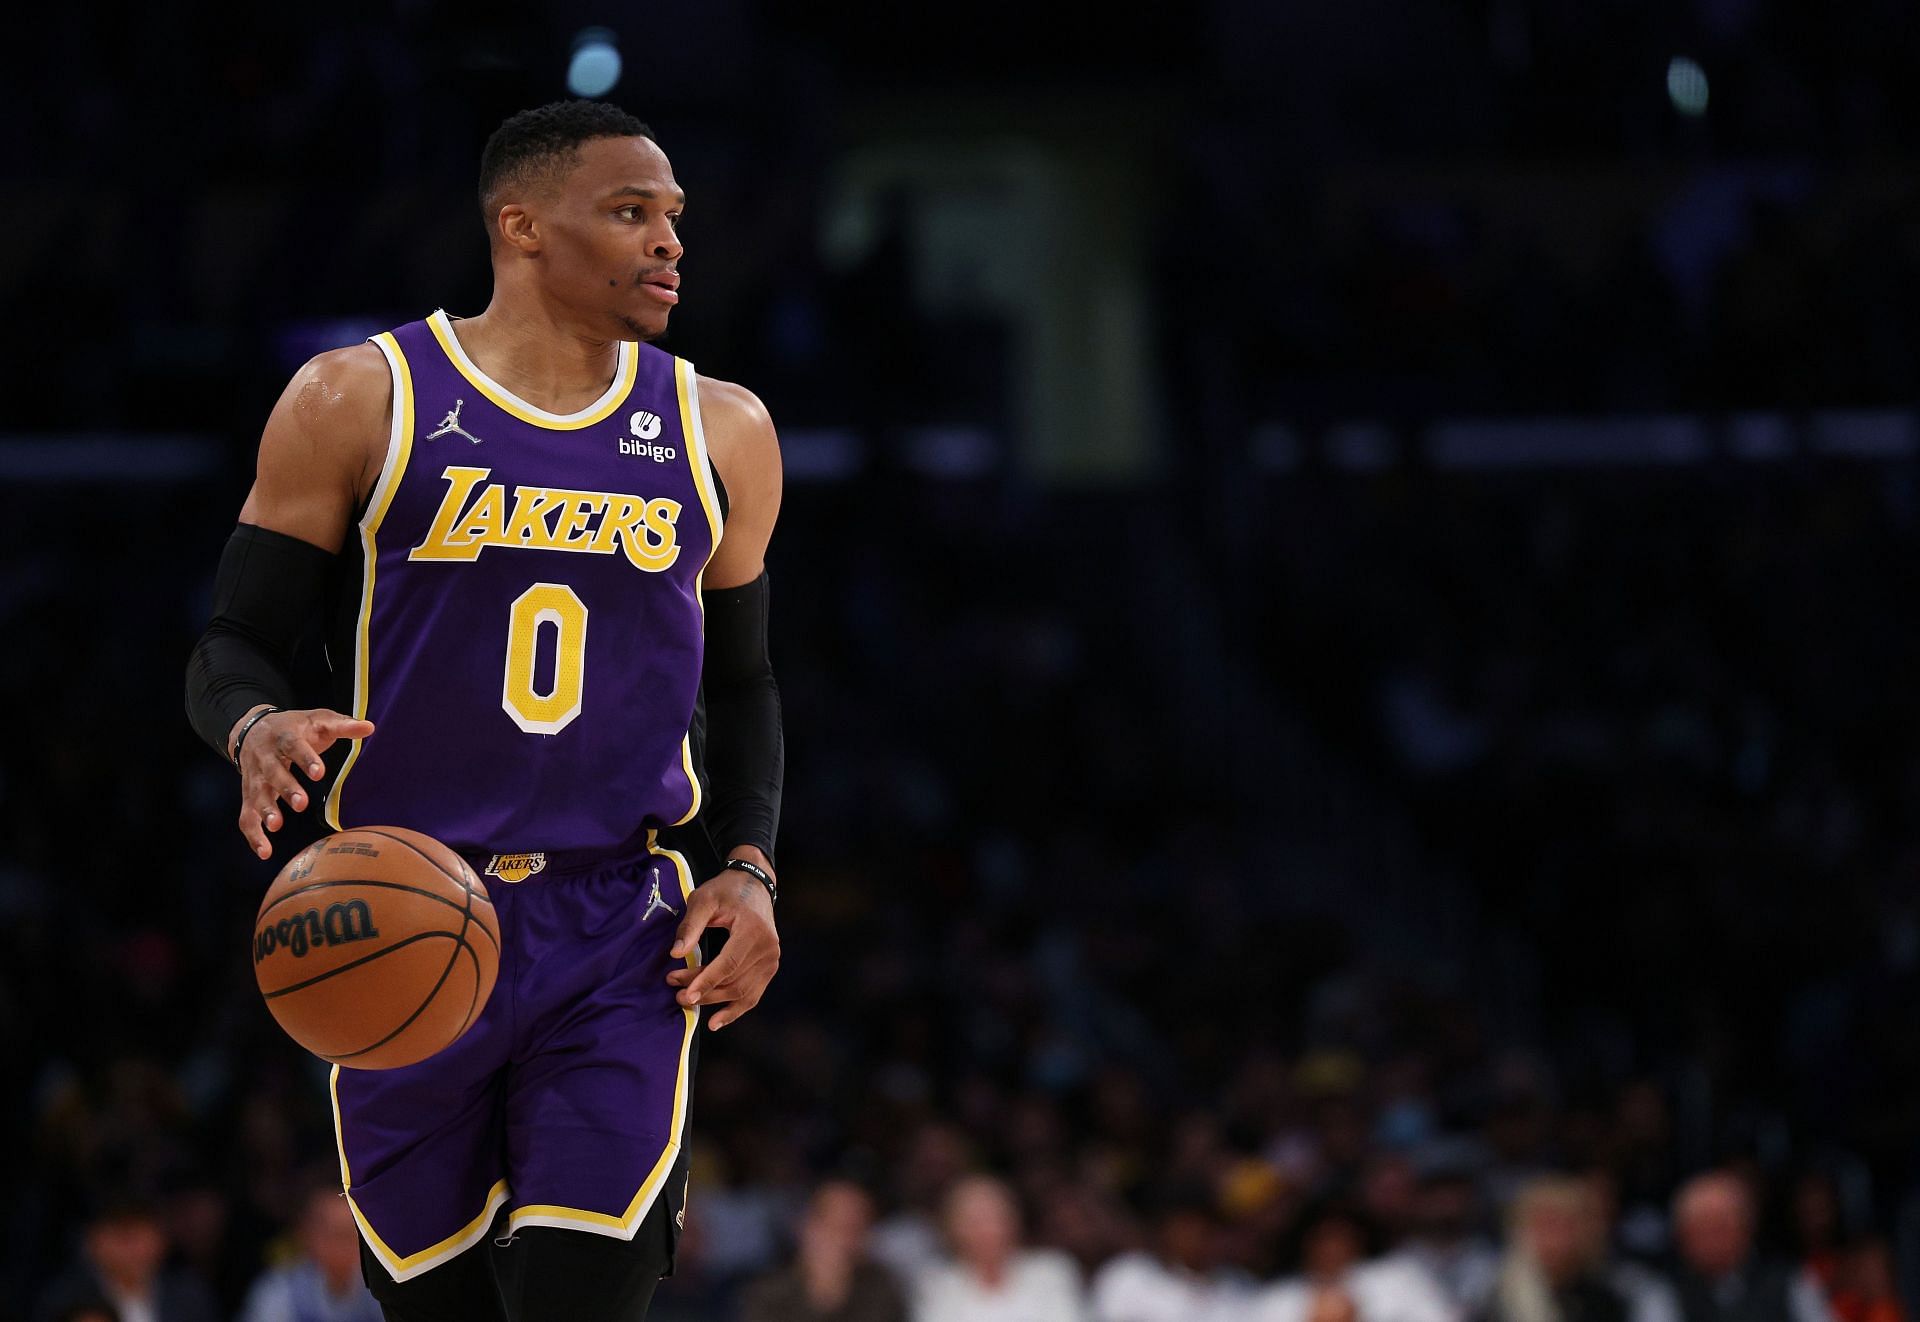 Russell Westbrook of the Los Angeles Lakers brings up the ball during a 126-121 Philadelphia 76ers win at Crypto.com Arena on March 23, 2022 in Los Angeles, California.